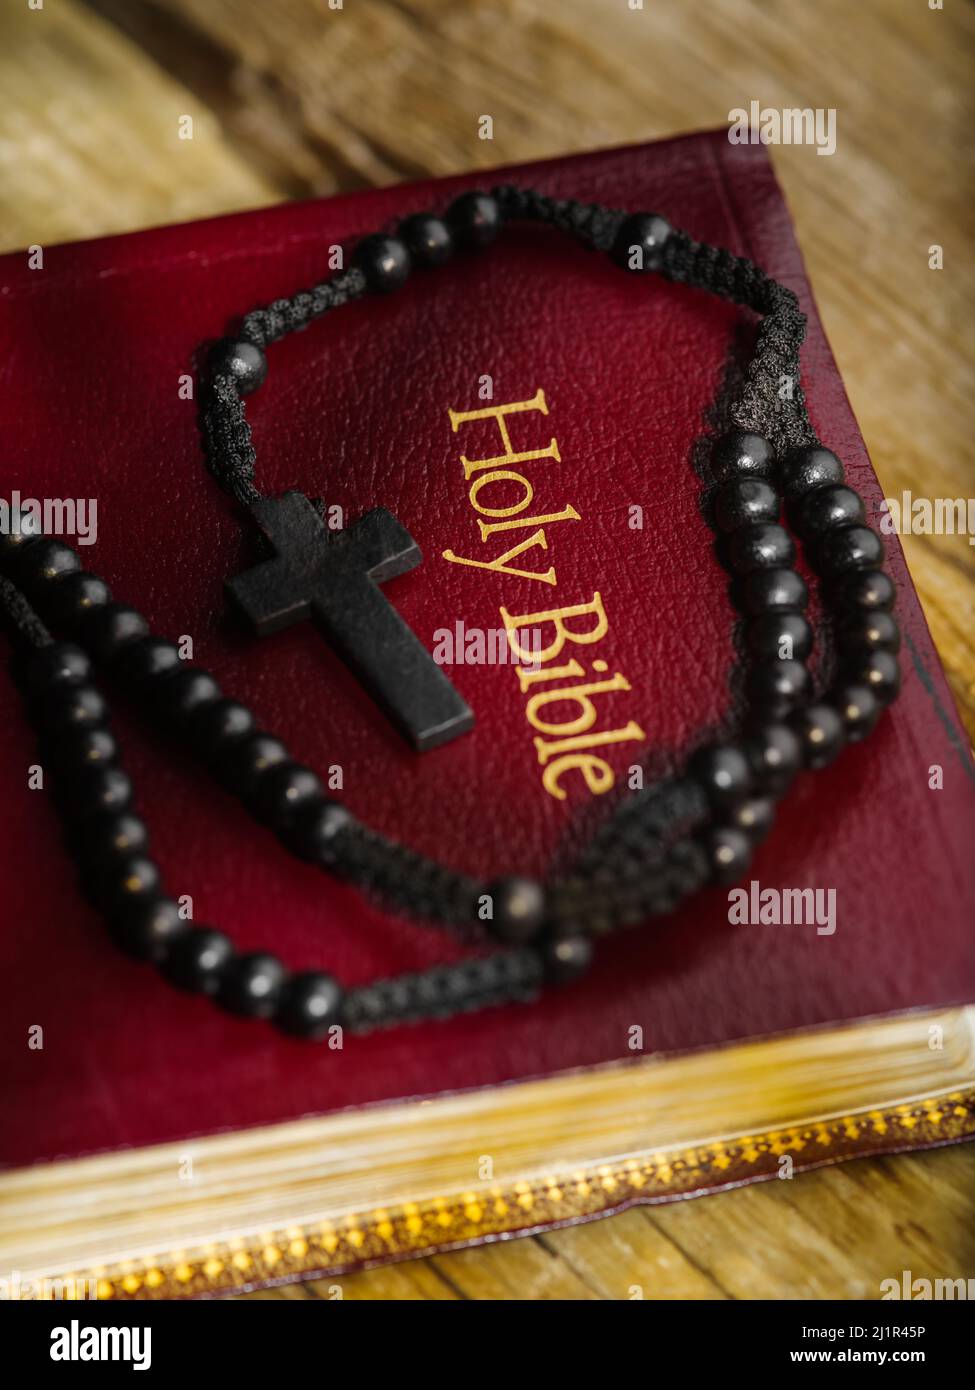 The Rosary's Beads and Their Meaning - Scripture Catholic